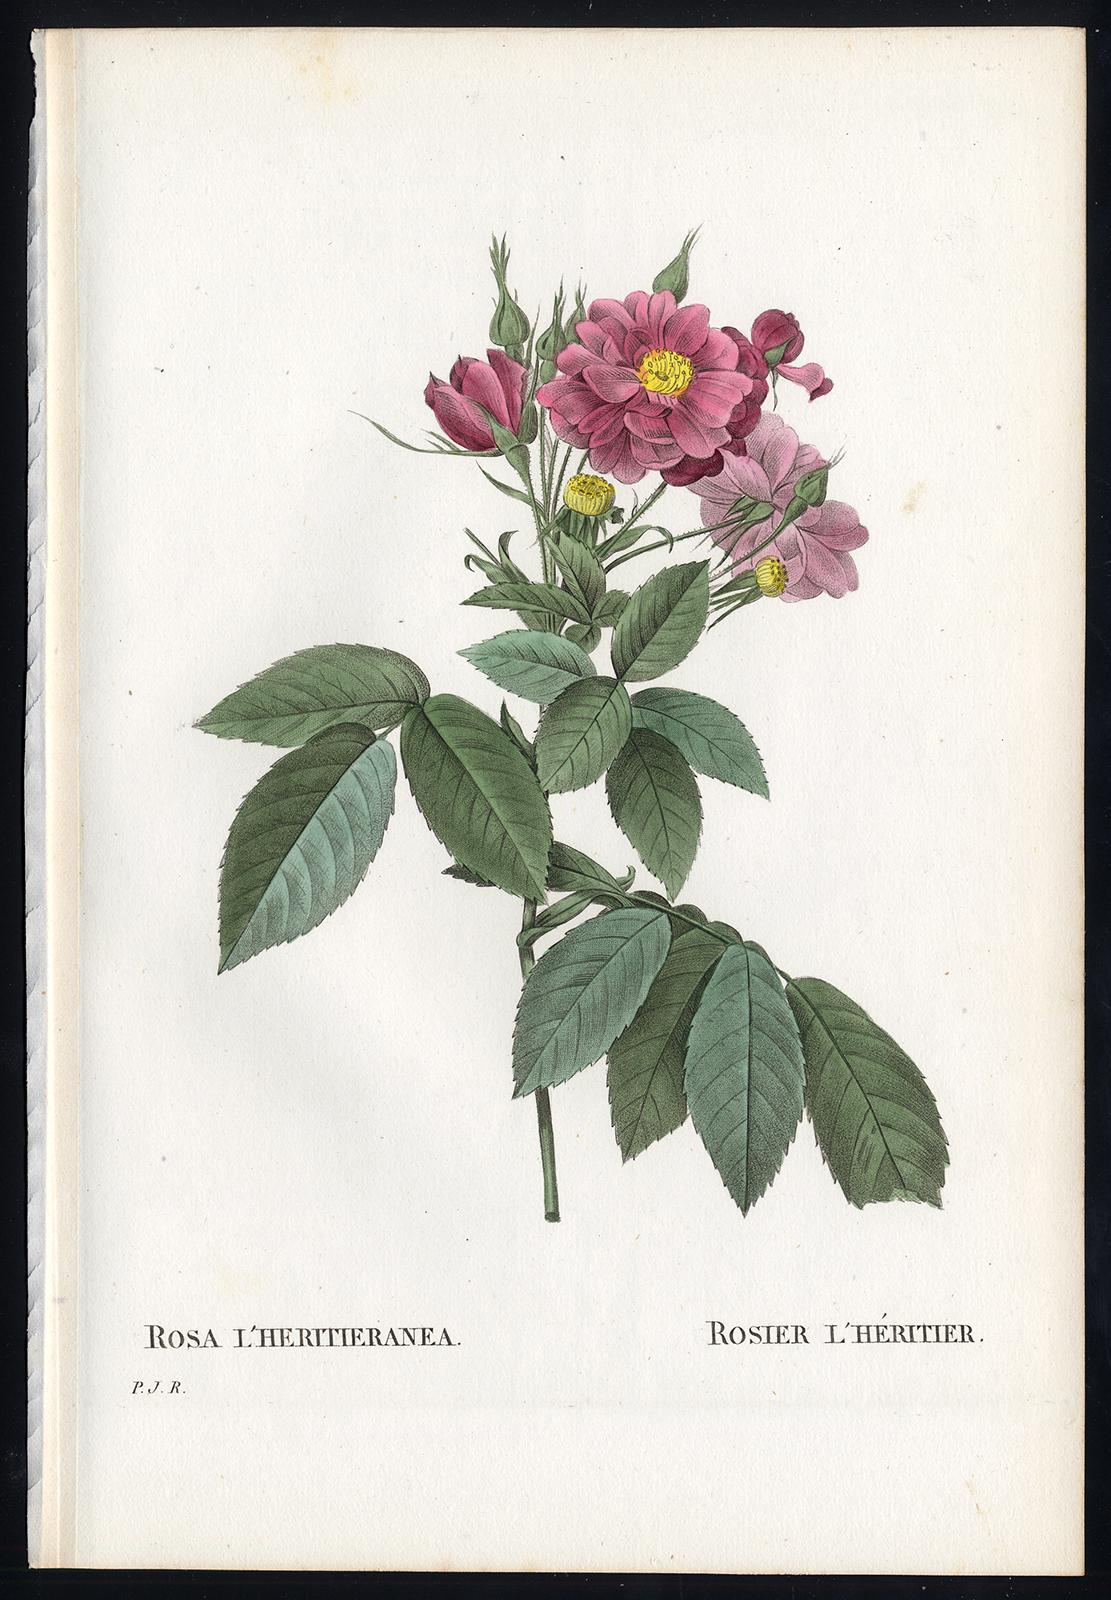 Pierre-Joseph Redouté Print - Boursault Rose by Redoute - Les Roses - Handcoloured engraving - 19th century